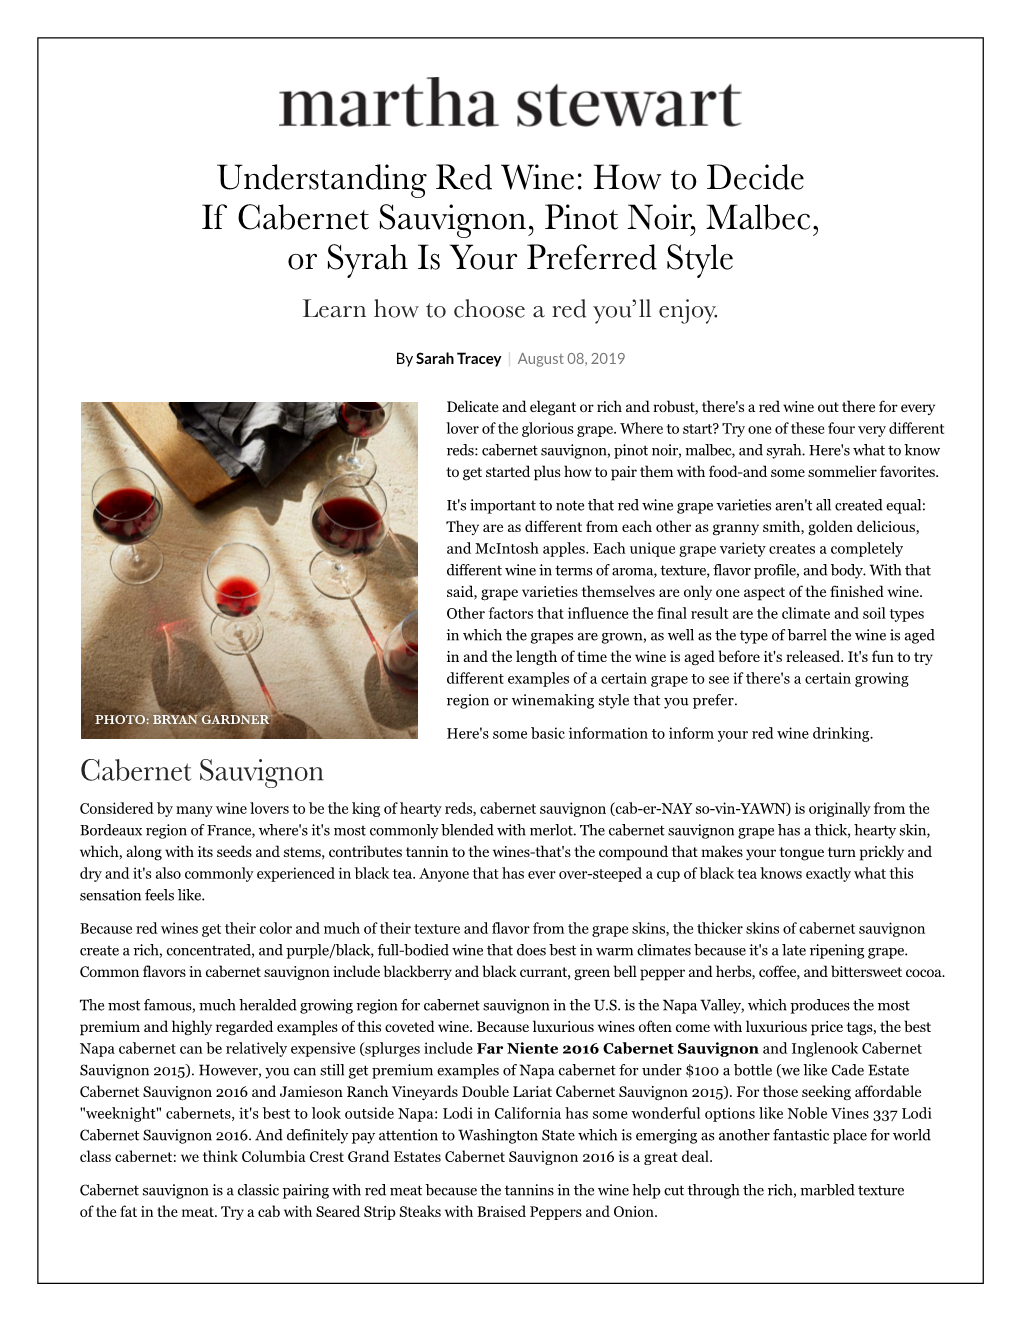 Understanding Red Wine: How to Decide If Cabernet Sauvignon, Pinot Noir, Malbec, Or Syrah Is Your Preferred Style Learn How to Choose a Red You’Ll Enjoy